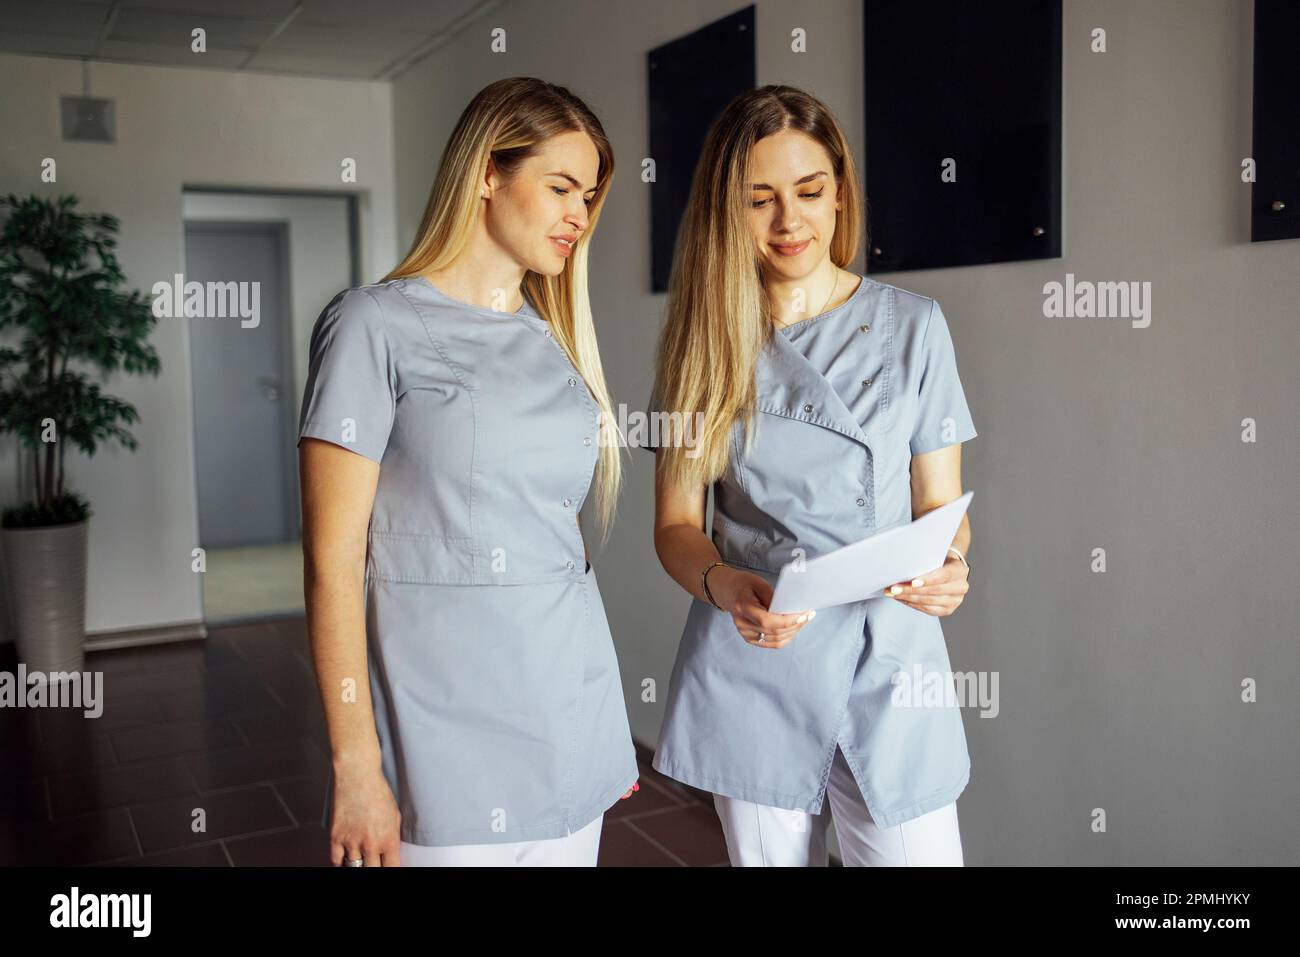 Beautiful smiling female doctors in medical uniform stands near the window in clinic. Young nurses is holding sheets of paper in her hands. Sunny day. Stock Photo